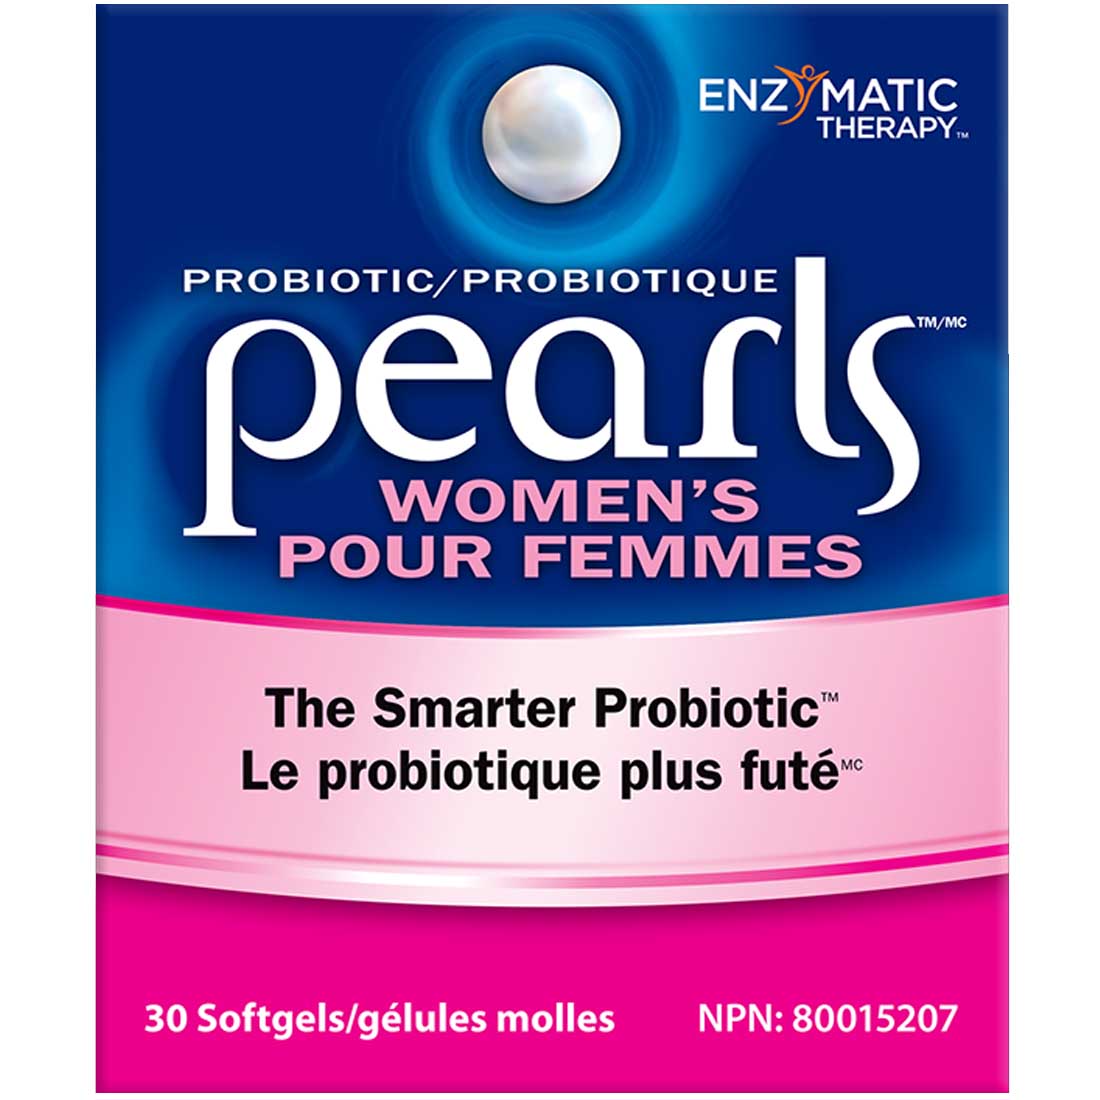 Nature's Way Probiotic Pearls Women's, 30 Softgels (Formerly Enzymatic Therapy)